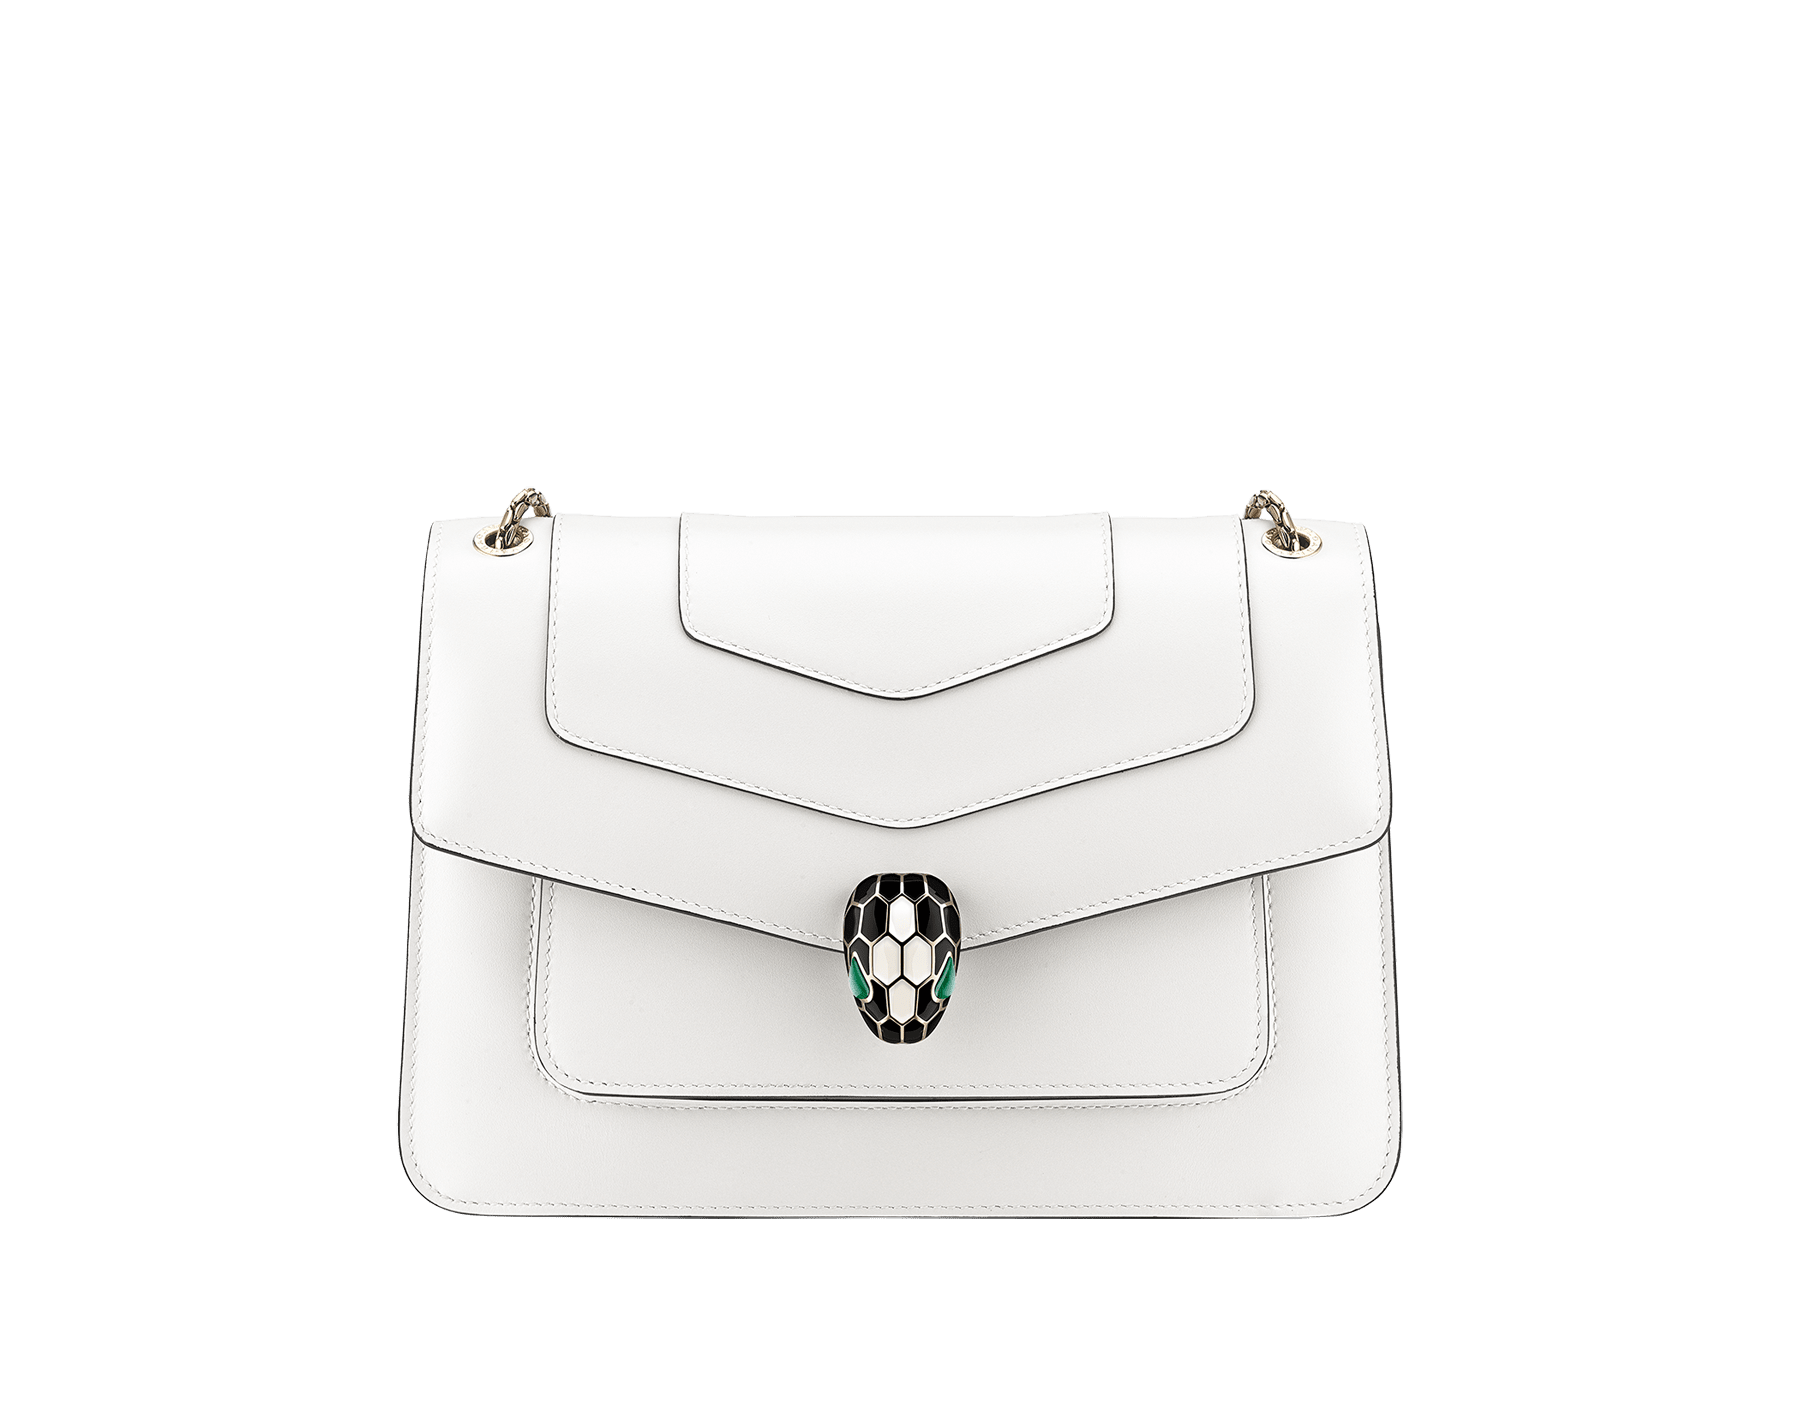 Serpenti Forever medium shoulder bag in black calf leather with emerald green grosgrain lining. Captivating snakehead closure in light gold-plated brass embellished with black and white agate enamel scales and green malachite eyes. 1077-CLa image 1